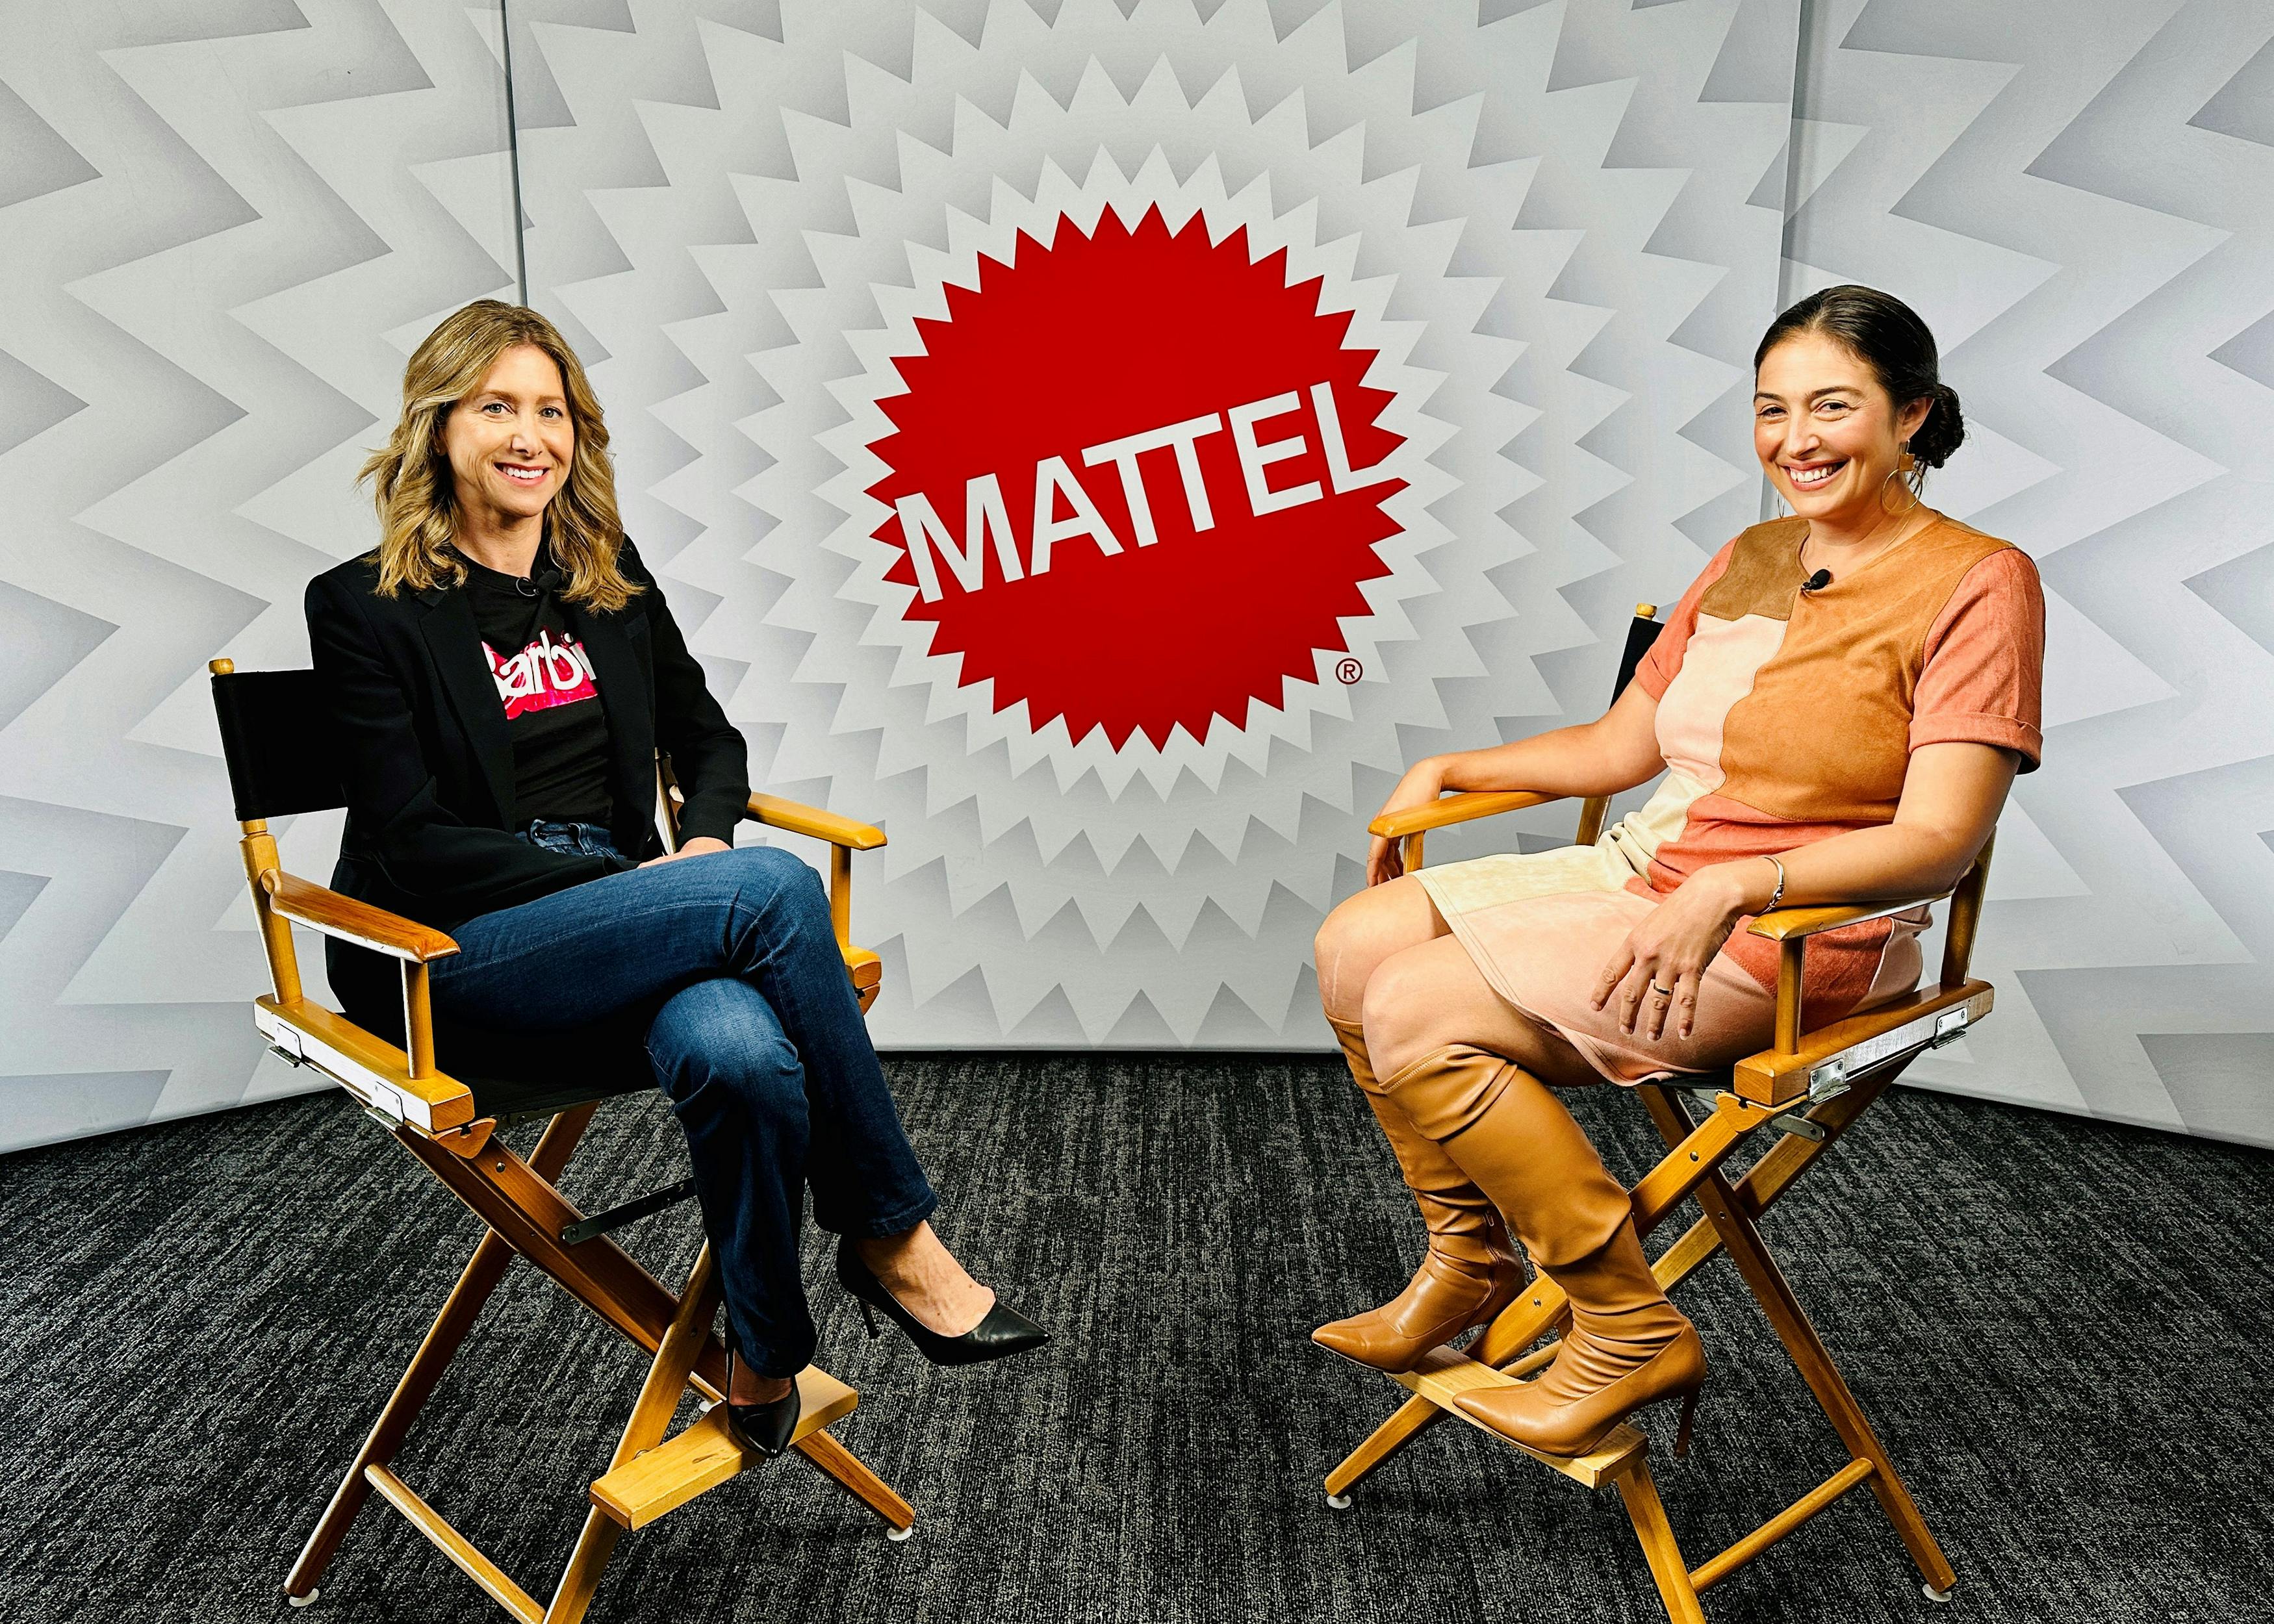 Let's Talk with Catherine Frymark of Mattel